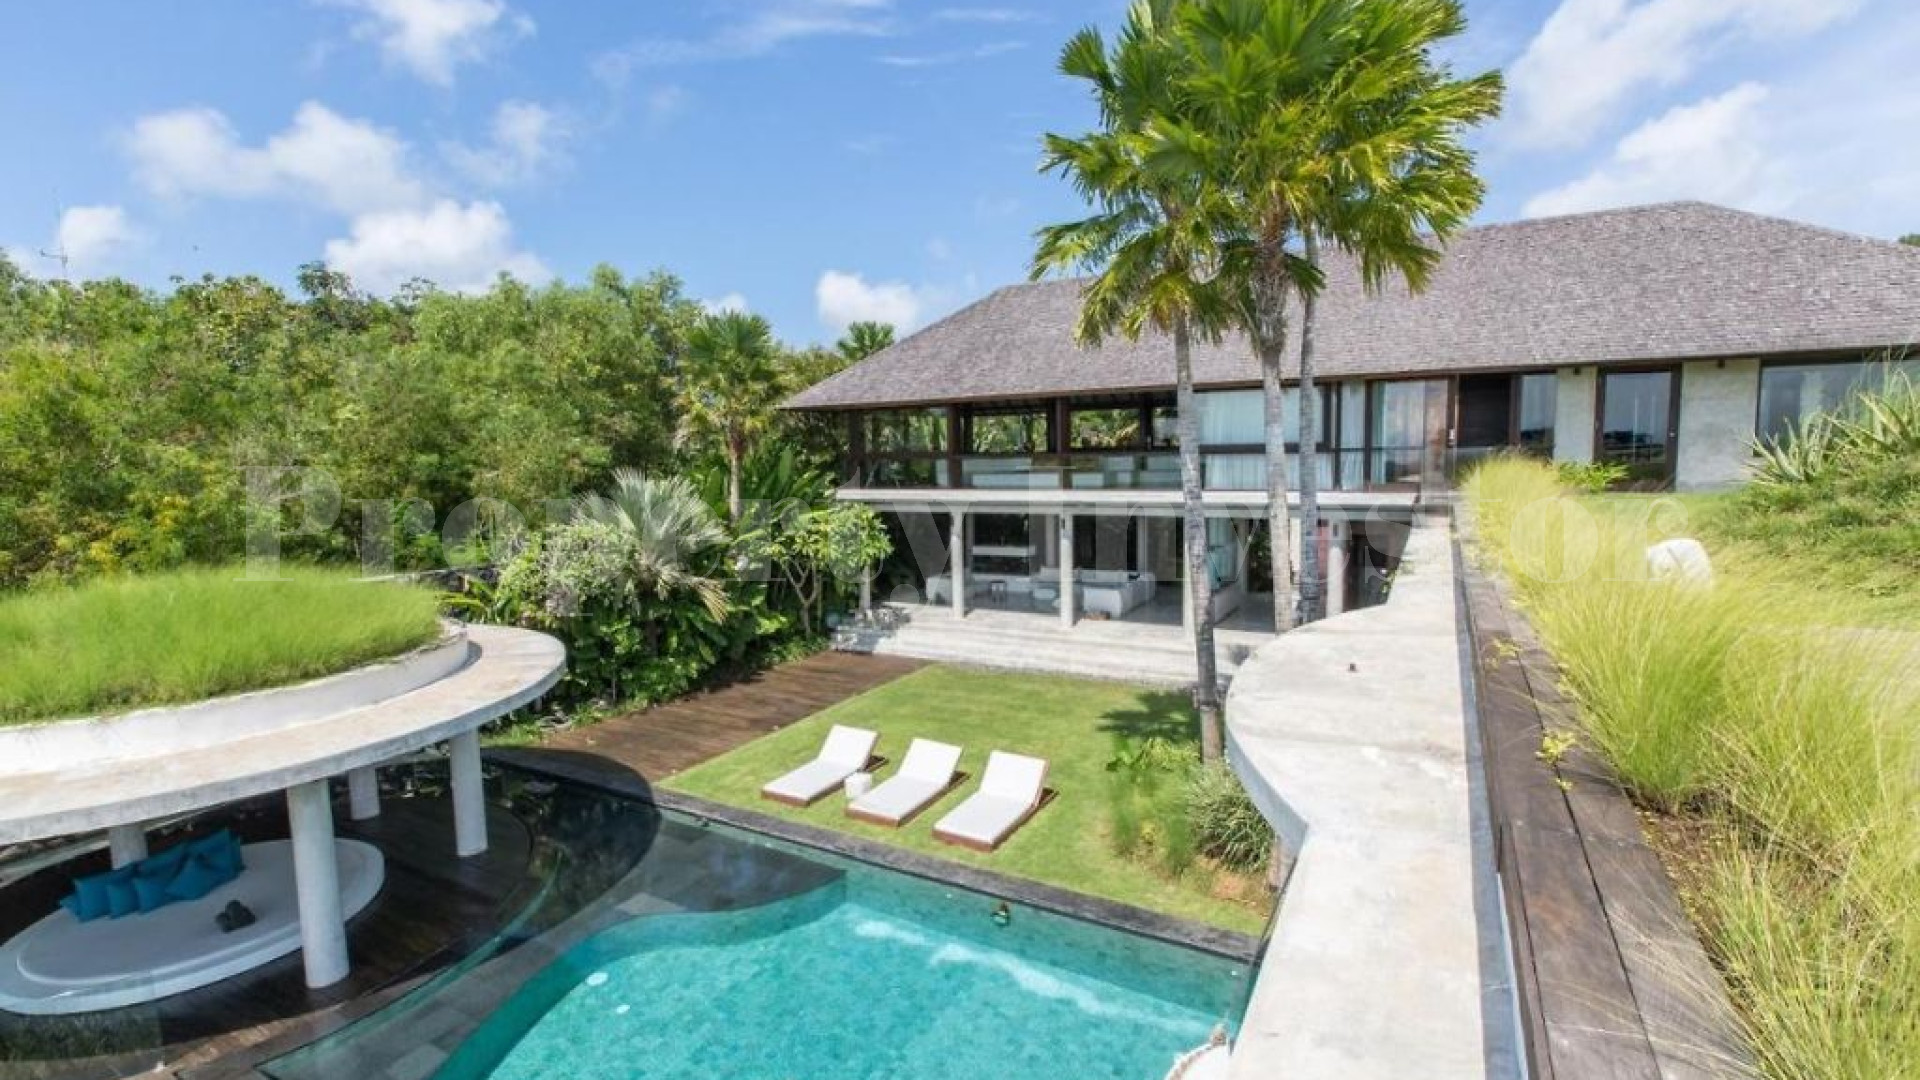 Impressive 4 Bedroom Contemporary Luxury Villa with Spectacular Valley Views for Sale in Uluwatu, Bali